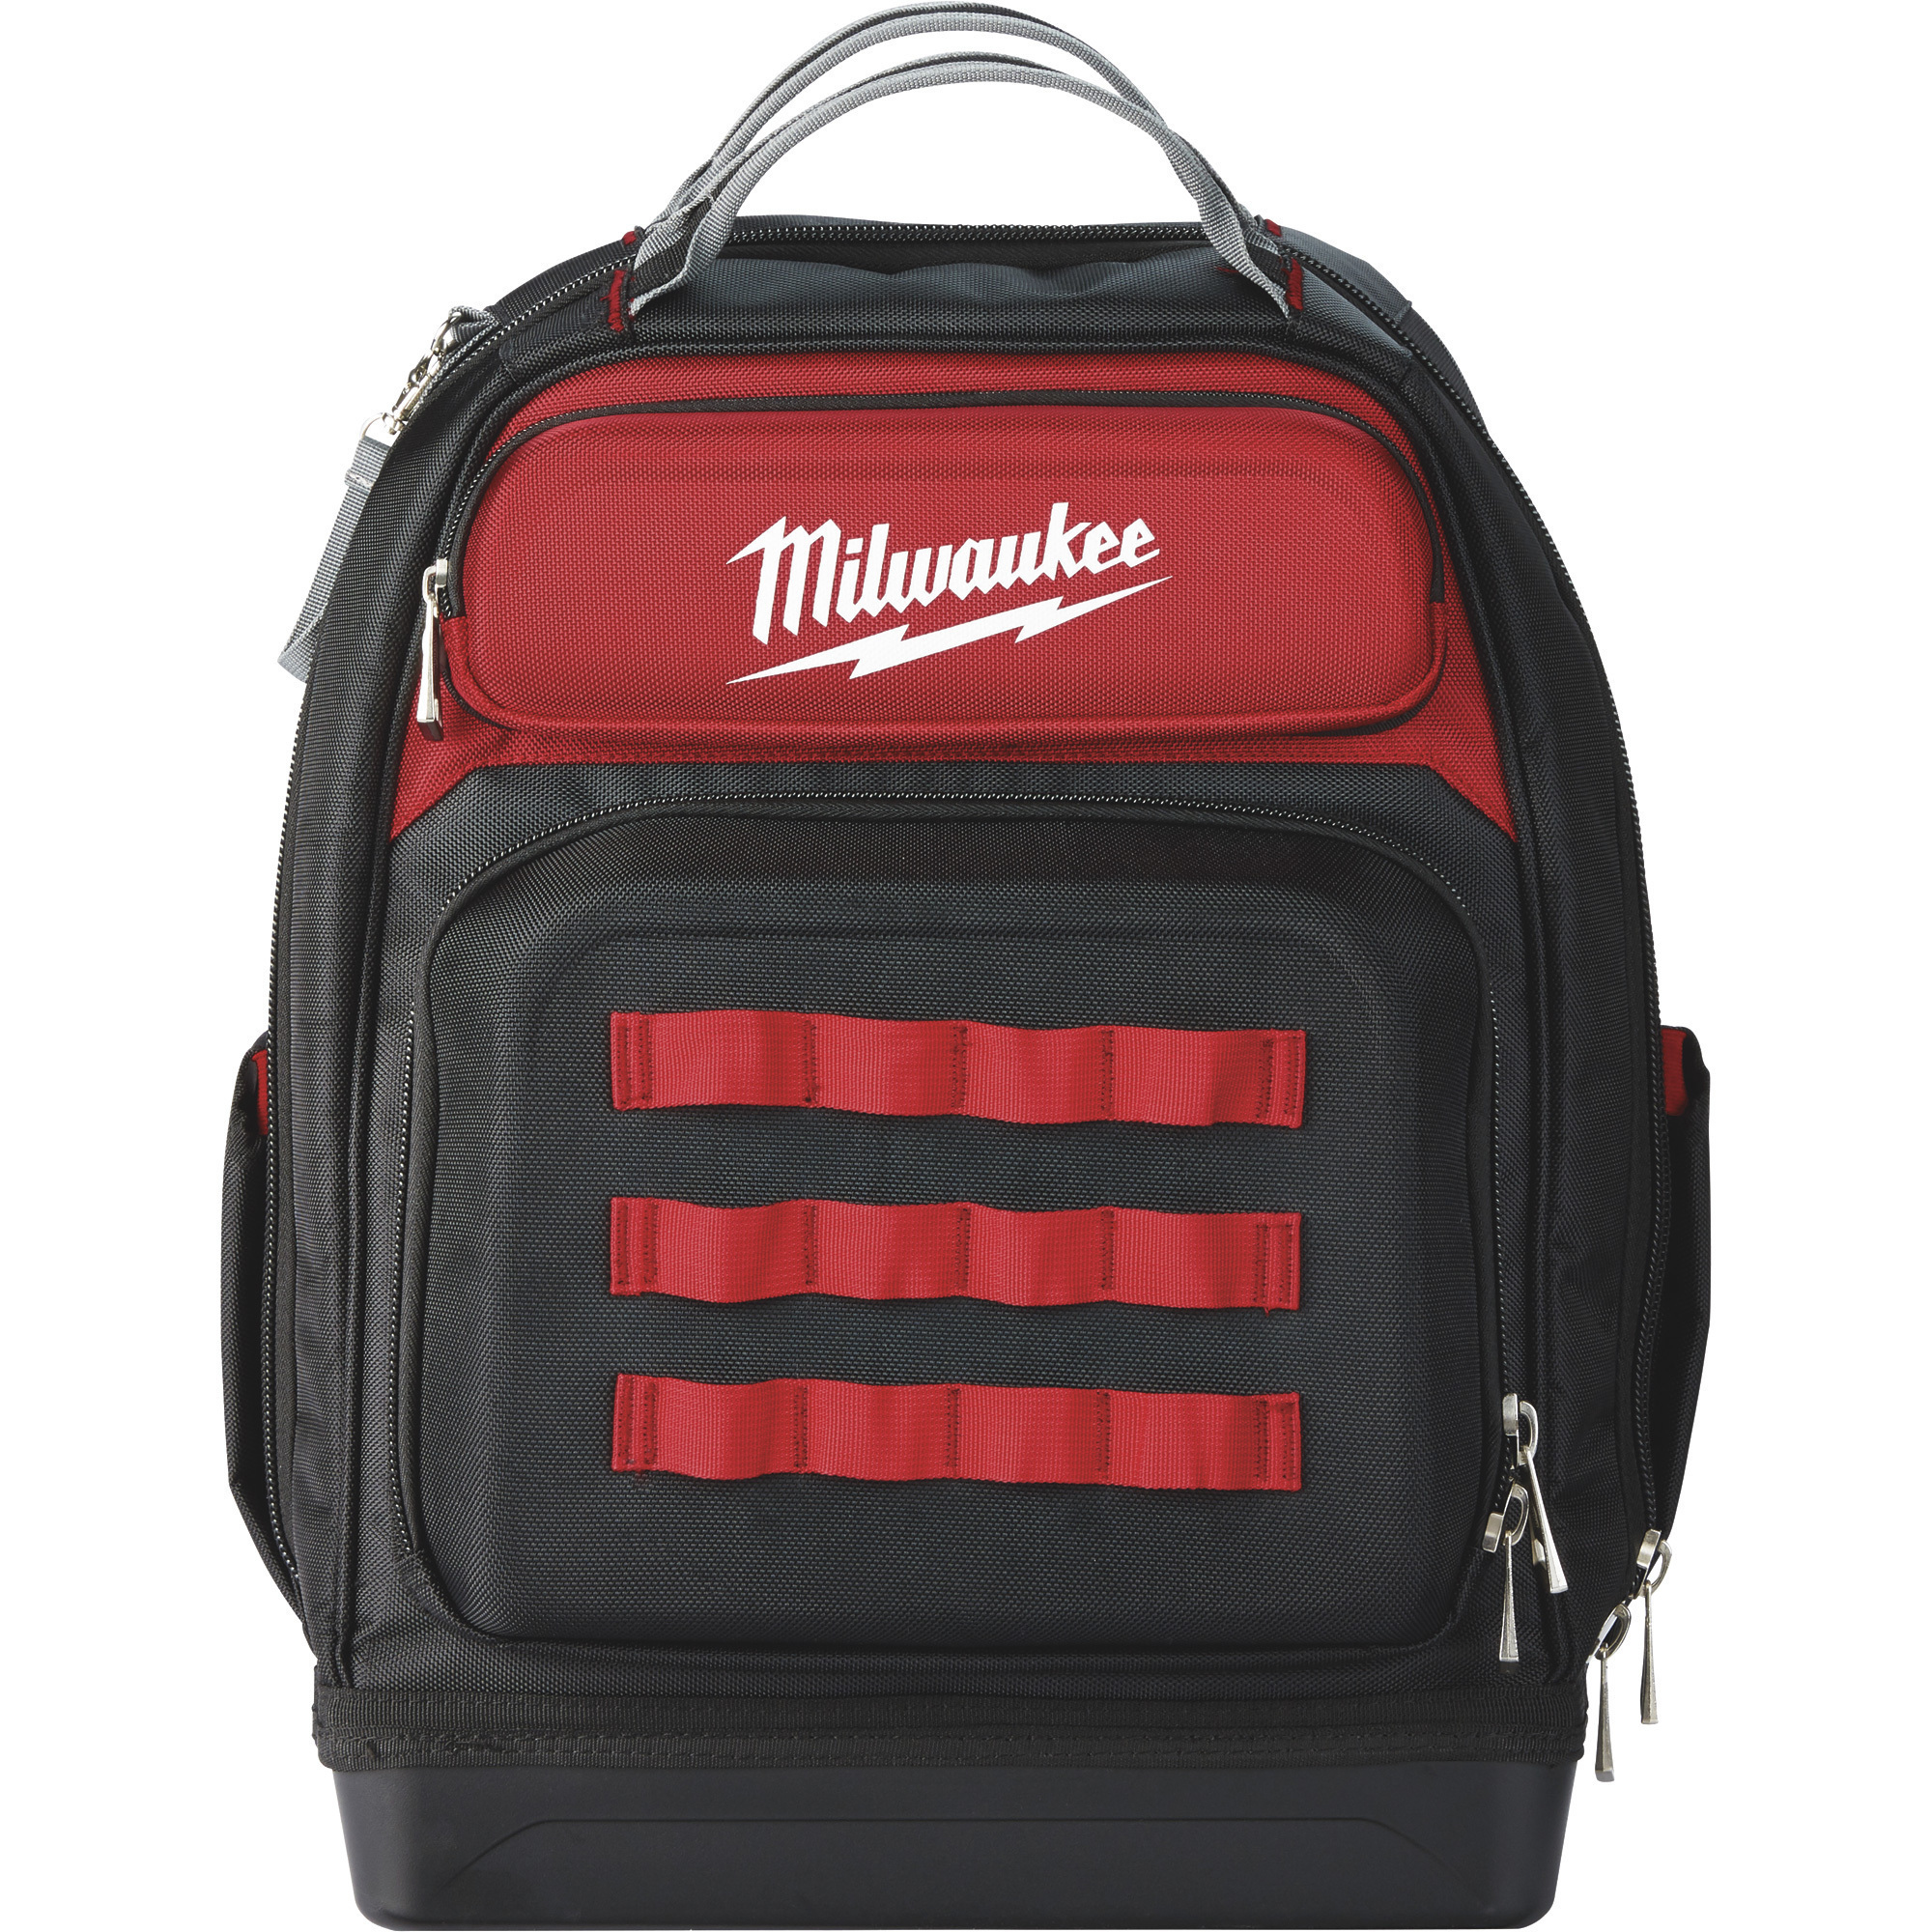 Milwaukee Ultimate Jobsite Backpack, 9 7/16Inch L x 20 3/8Inch W x 18Inch H, Model 48-22-8201